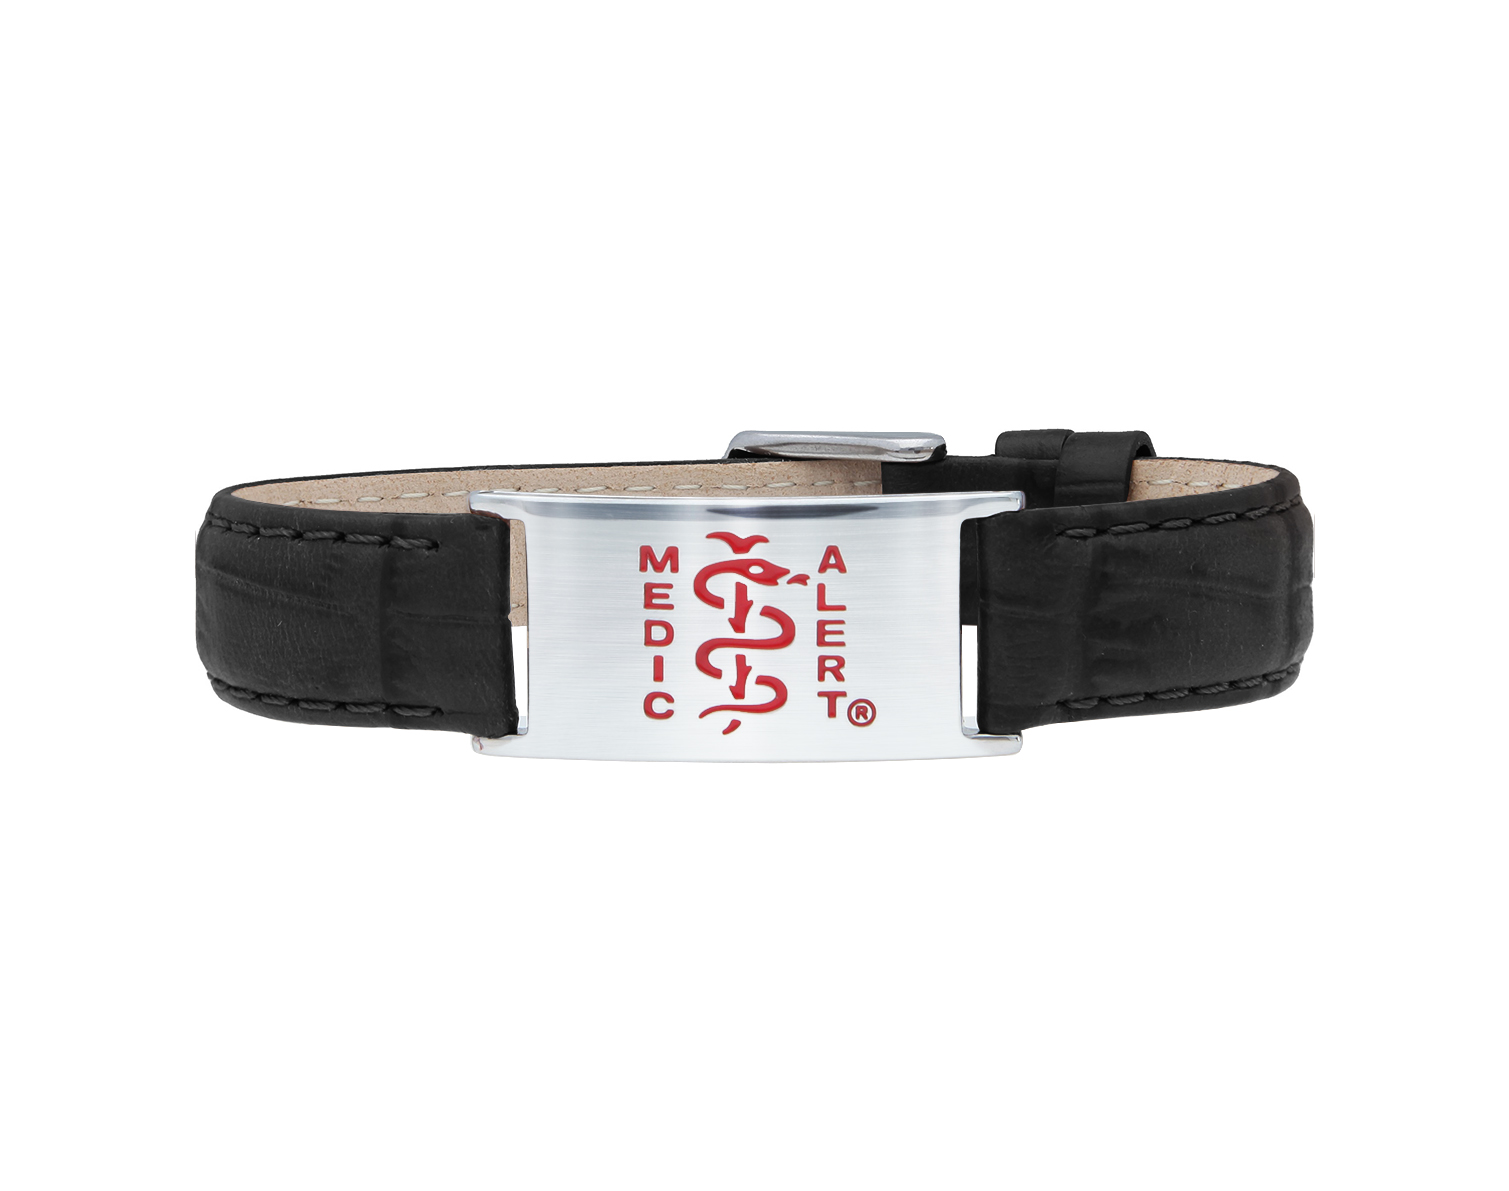 Black leather bracelet with stainless steel shield disc with red MedicAlert logo which includes the universal medical sign of a snake wrapped around a rod